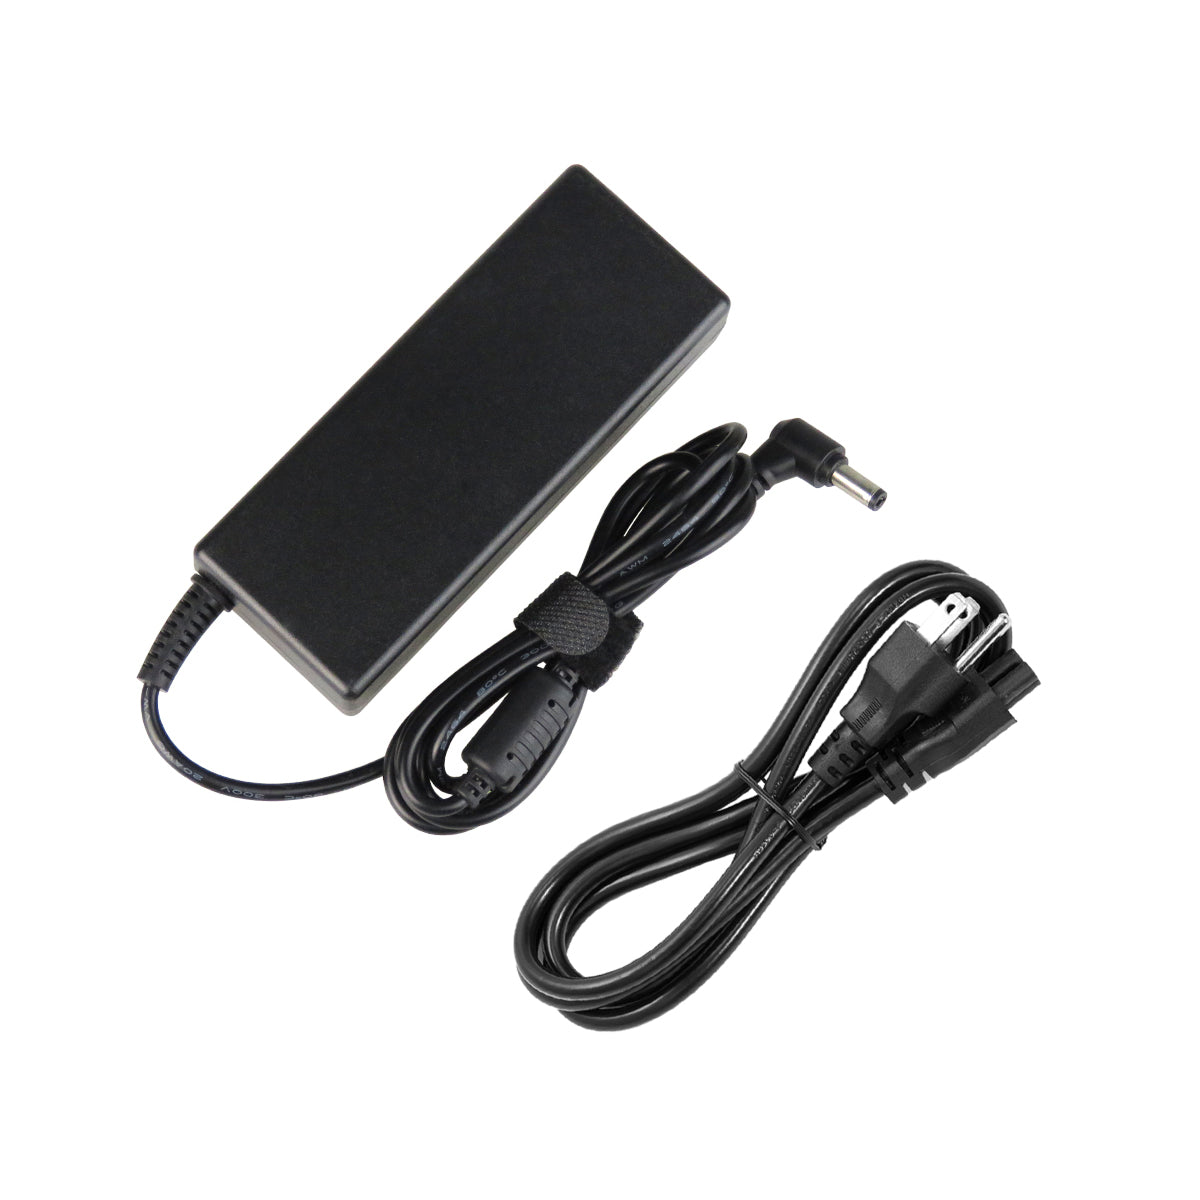 AC Adapter Charger for ASUS N56VJ Notebook.